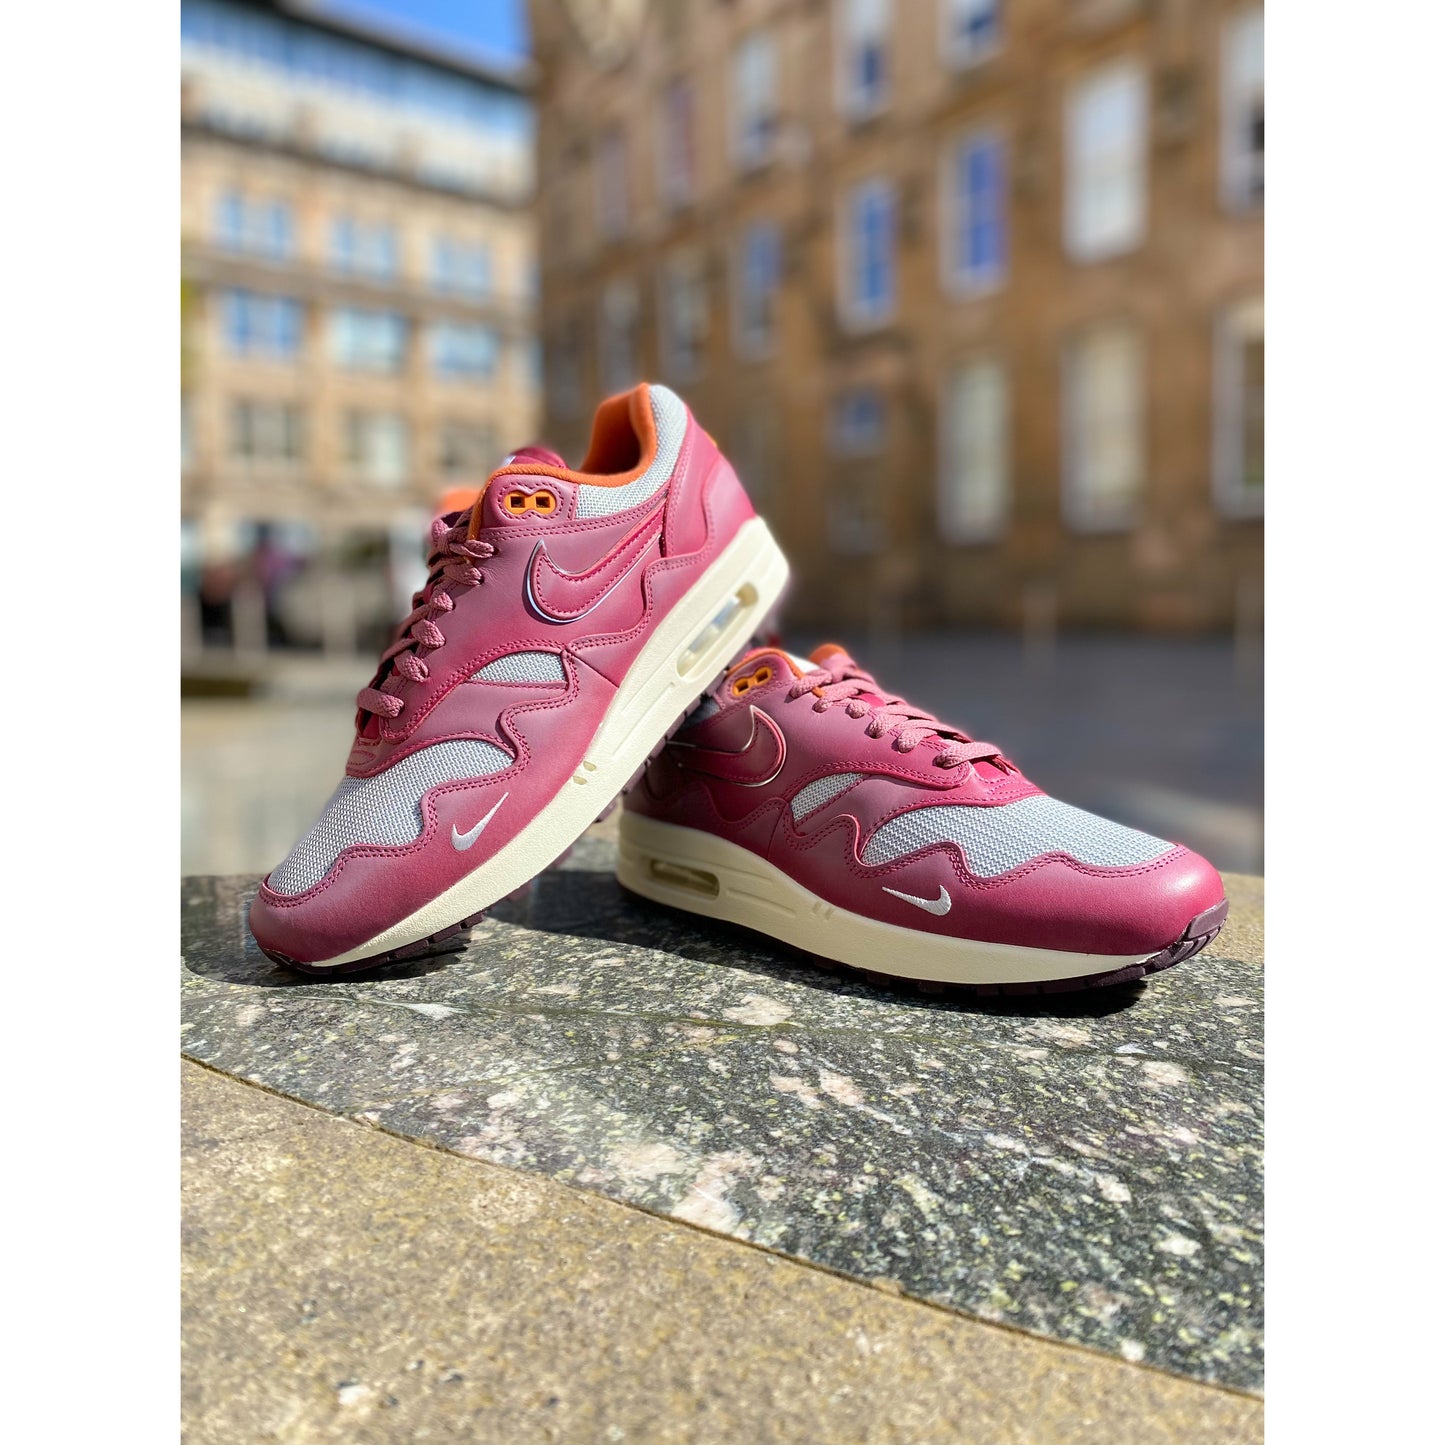 Nike Air Max 1 Patta Waves Rush Maroon (with Bracelet) from Nike